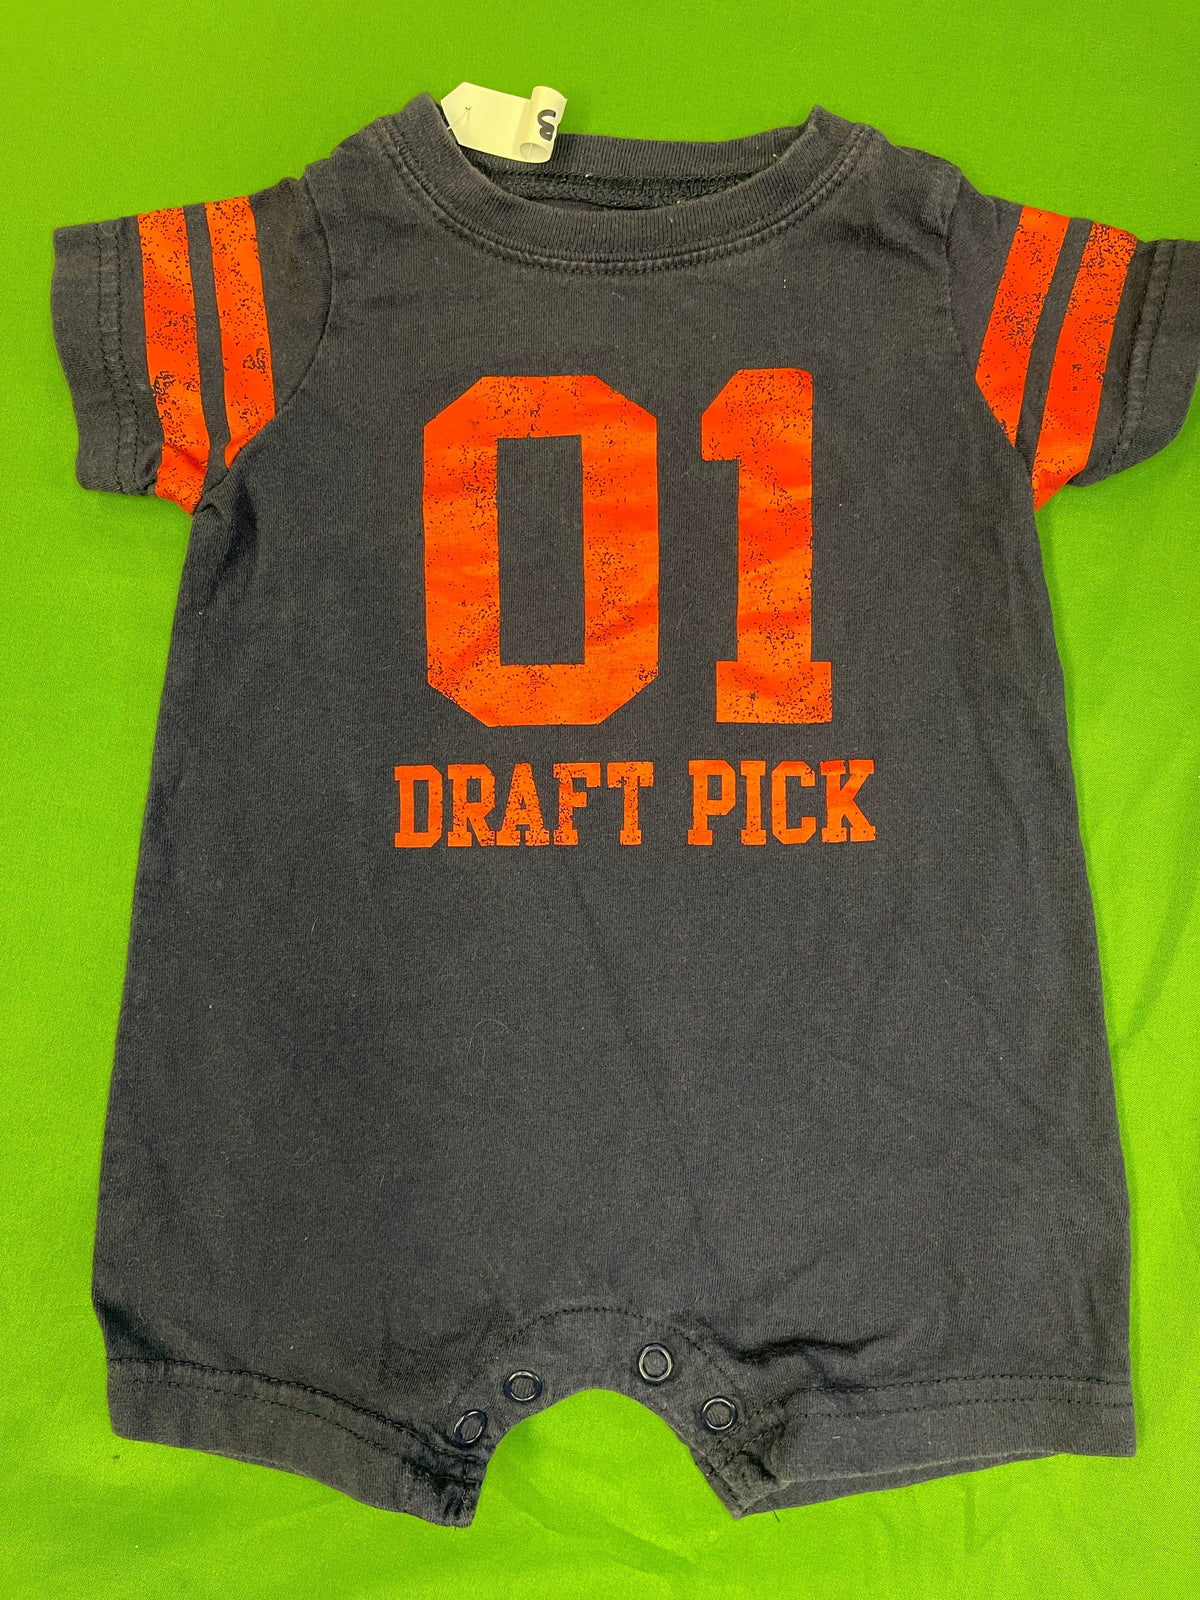 American Football "Draft Pick" Playsuit/Romper Infant Baby 3 Months